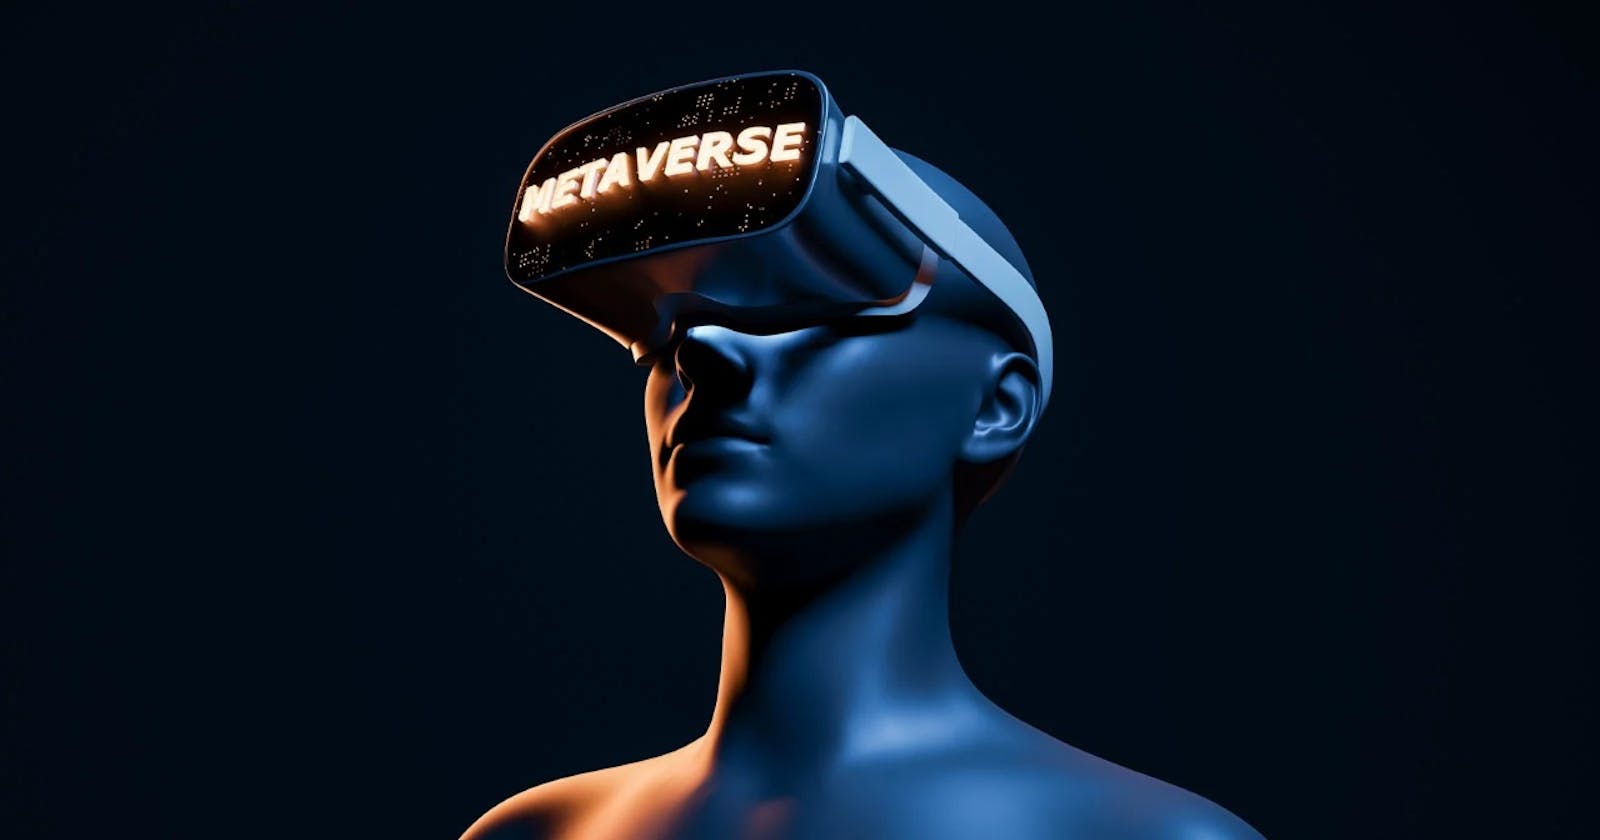 Metaverse: The Future of Technology